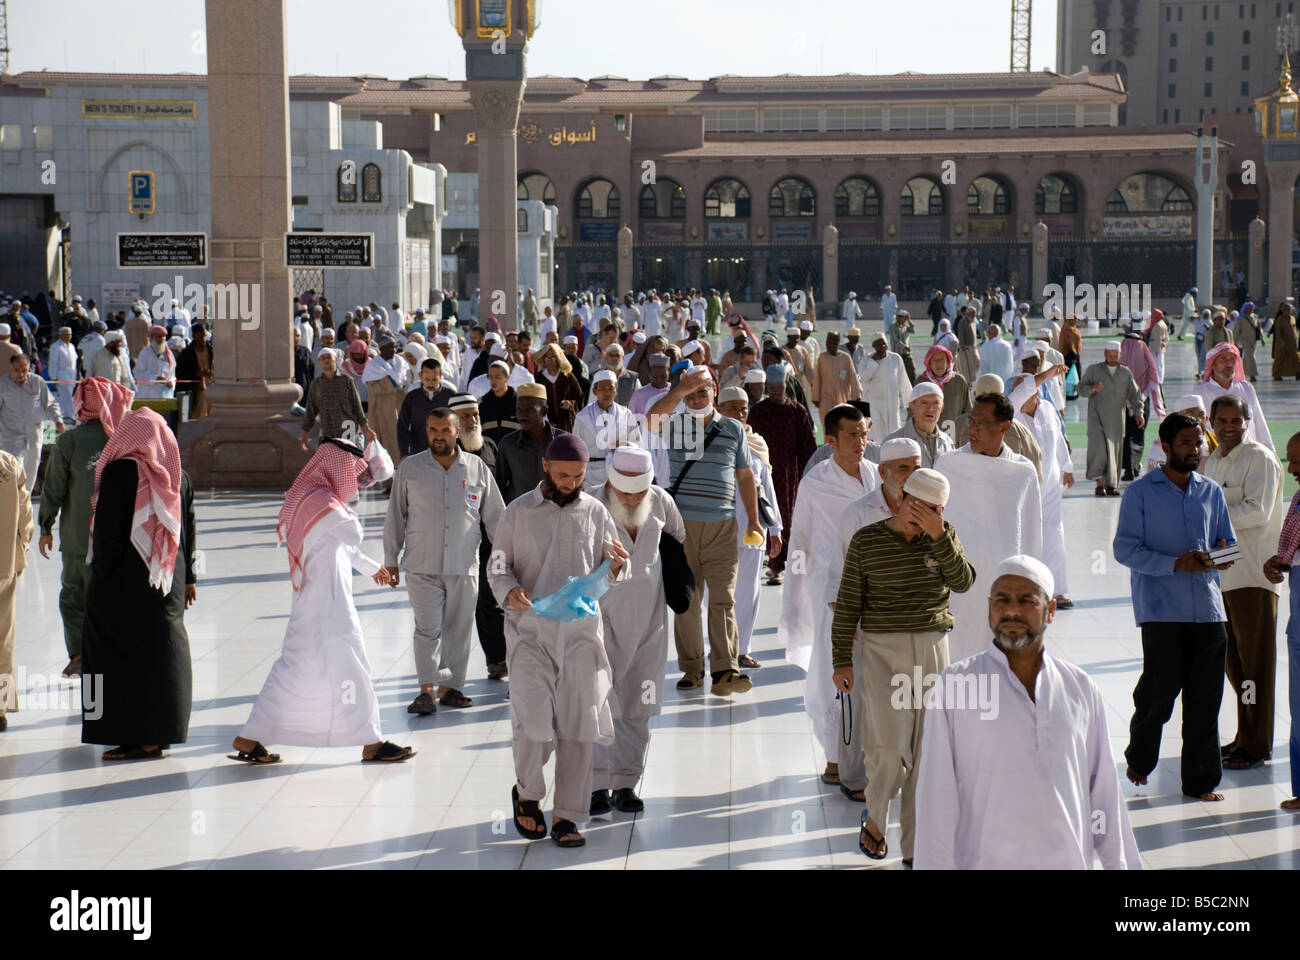 People arriving one of the gates of Masjid al Nabawi to offer their prayers in Madinah Saudi Arabia Stock Photo